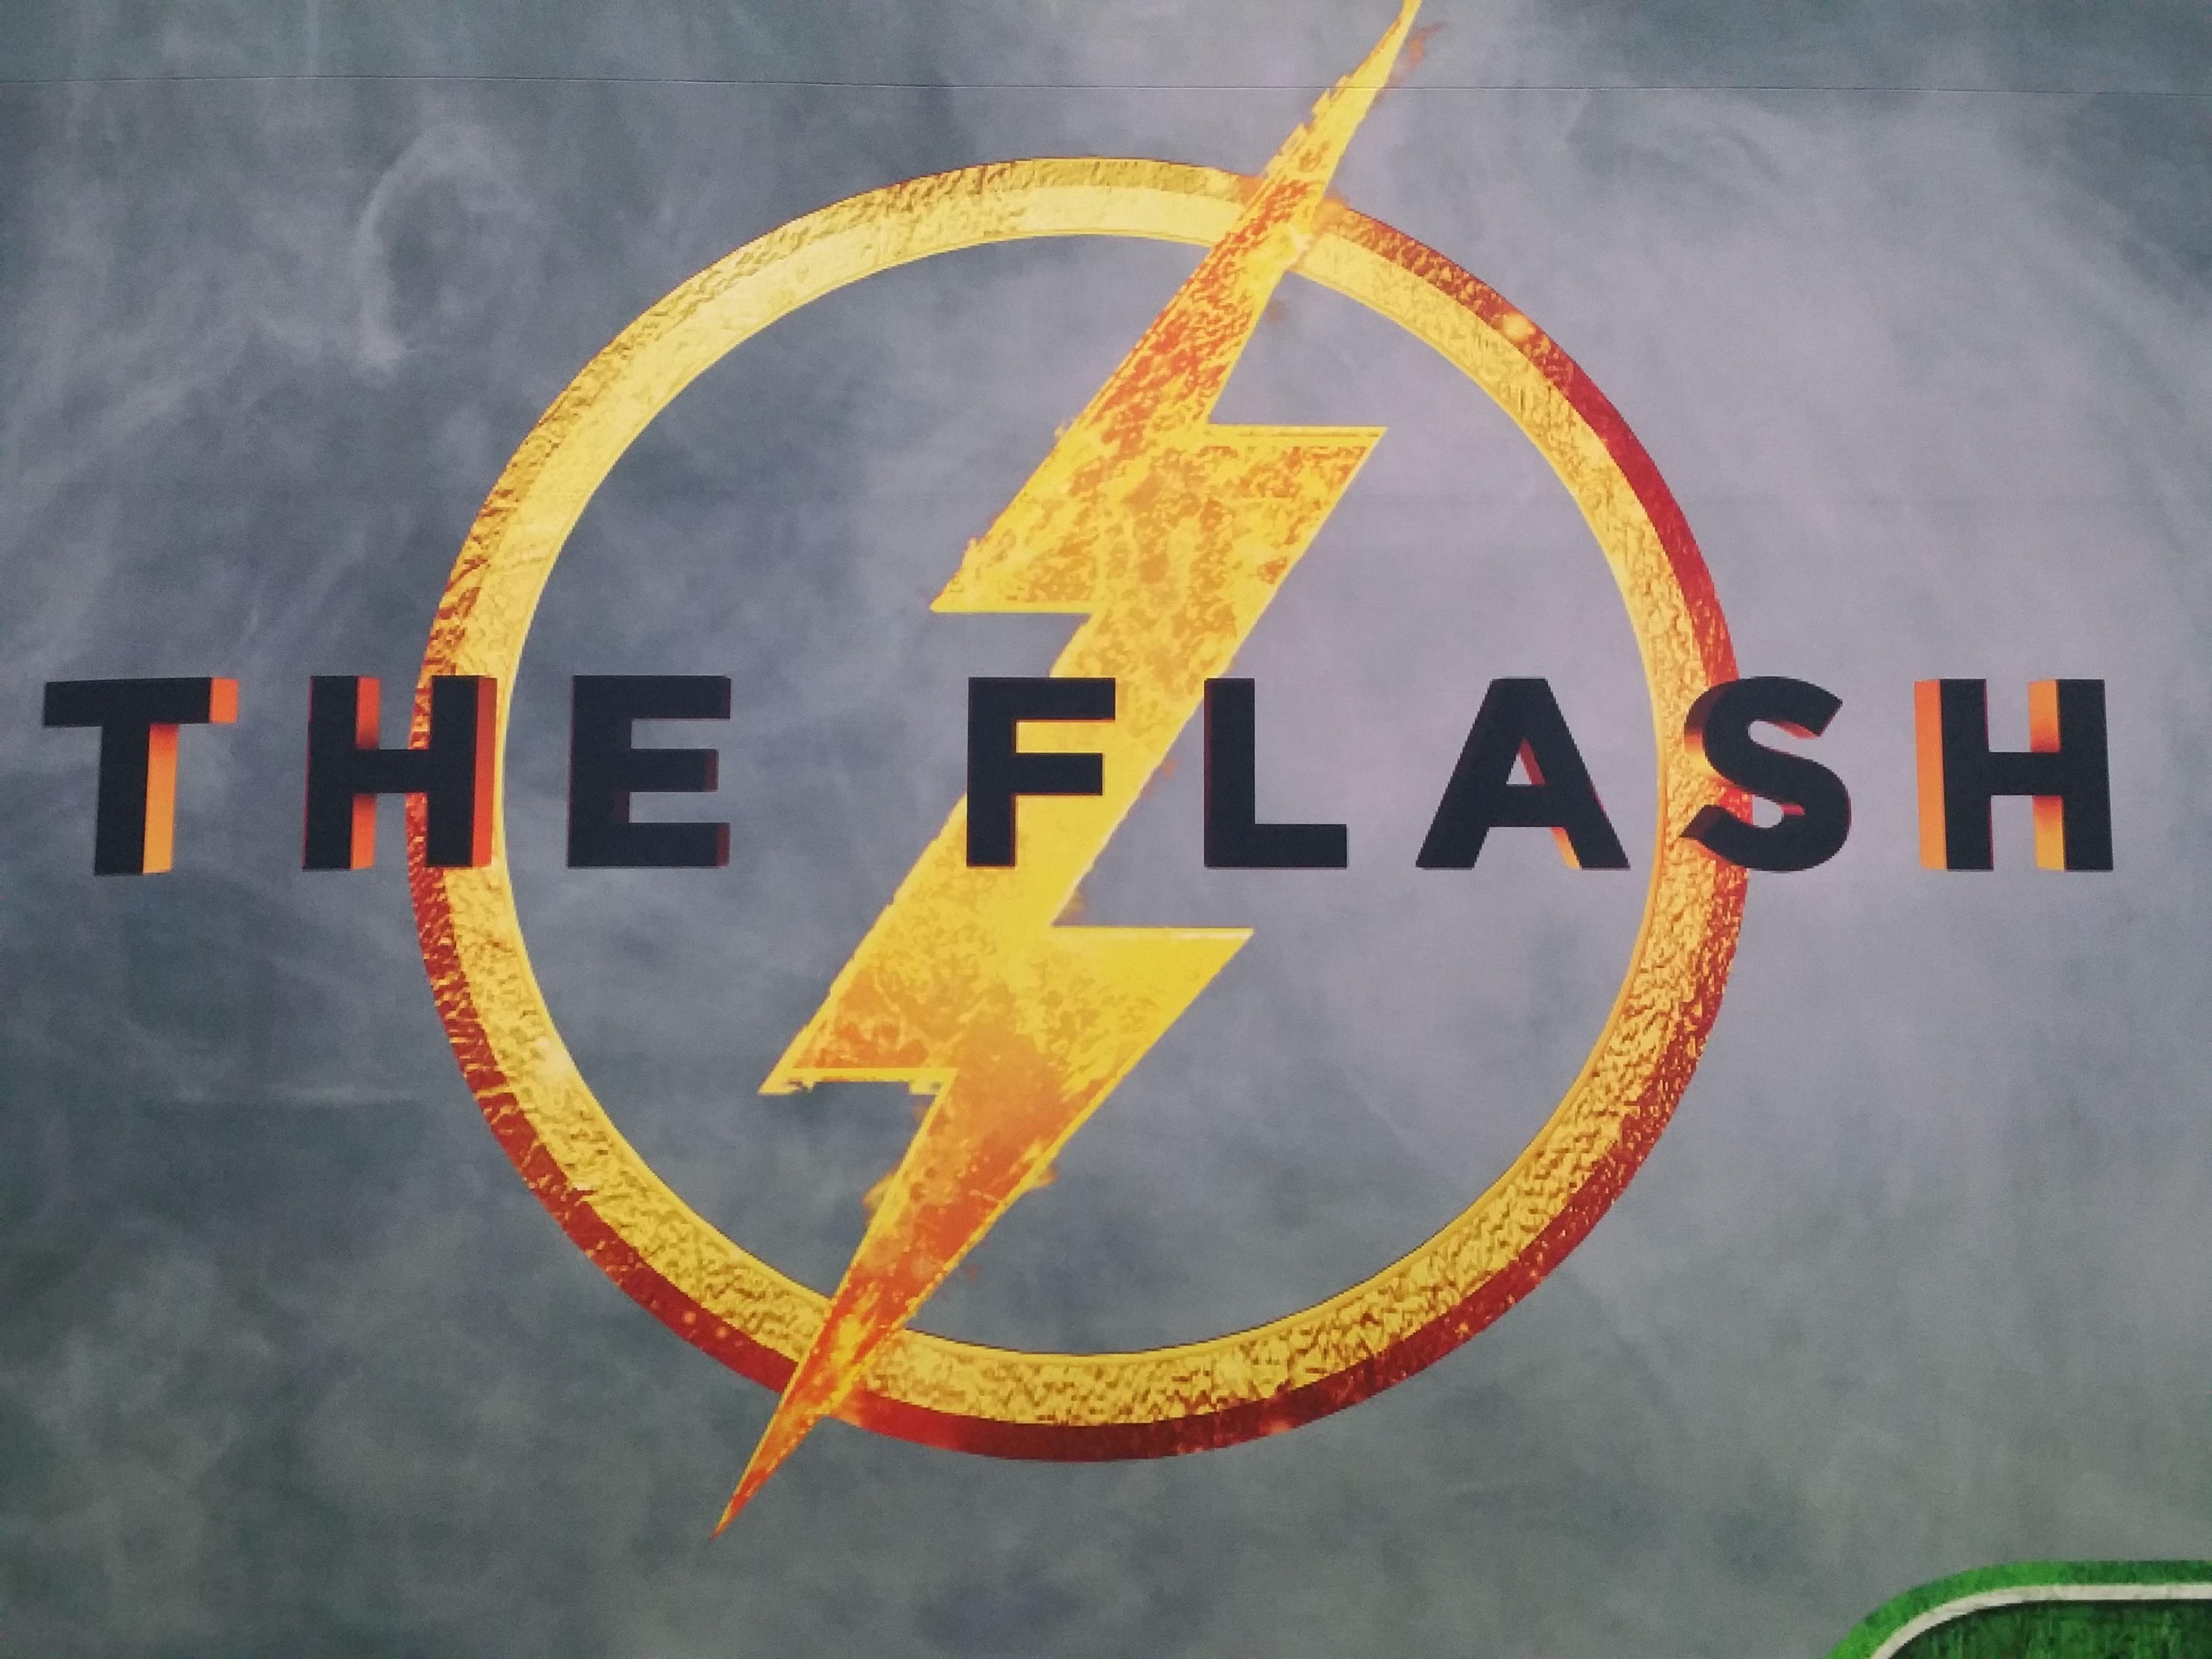 DC Flash Logo - DC Movies: Logos Revealed for Aquaman, The Flash, More | Collider